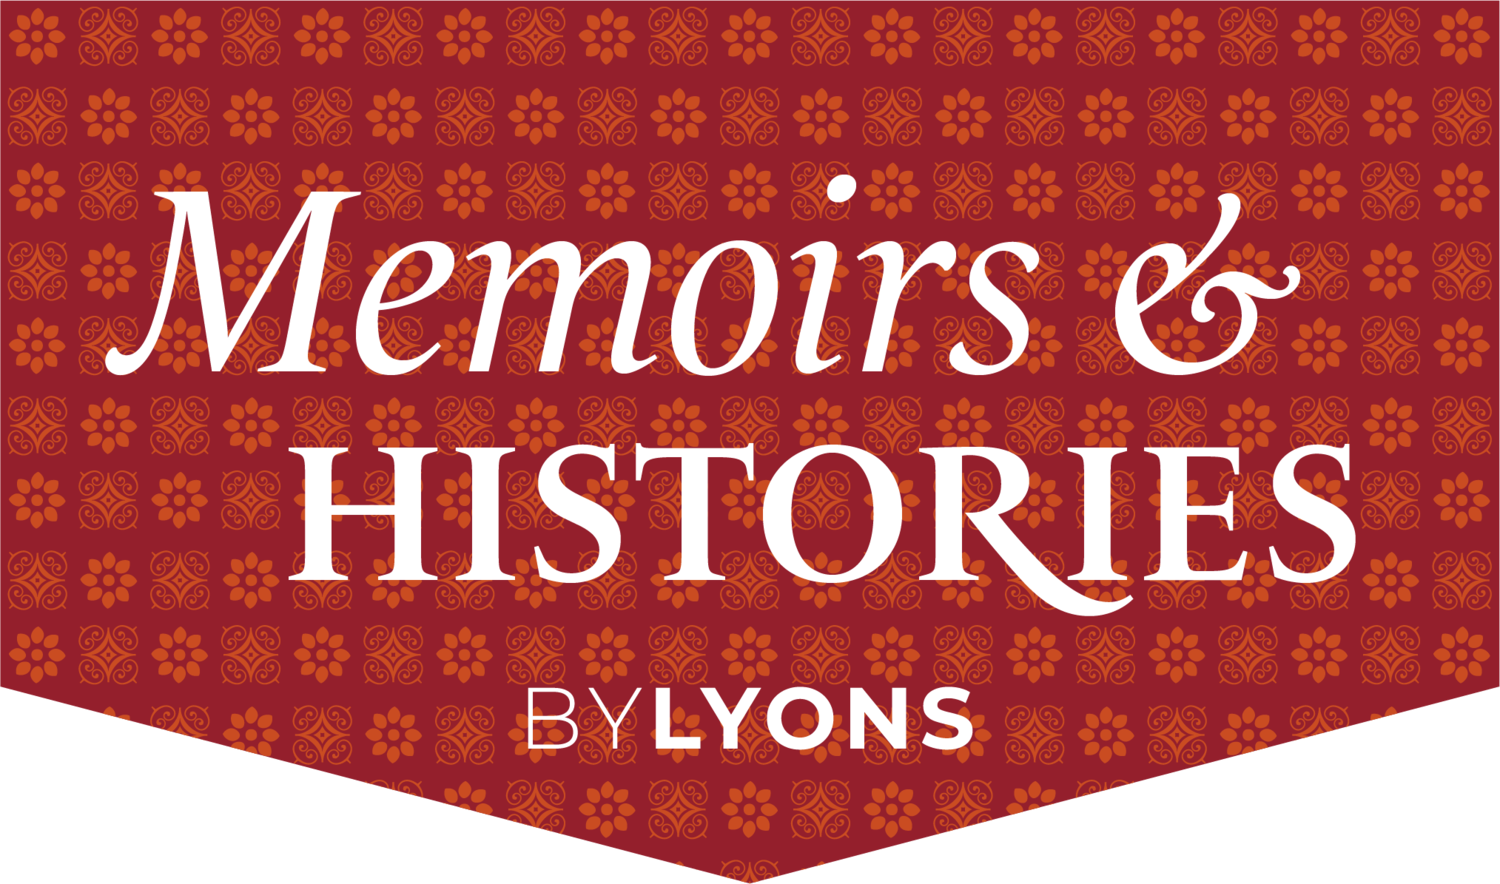 Memoirs and Histories ByLyons